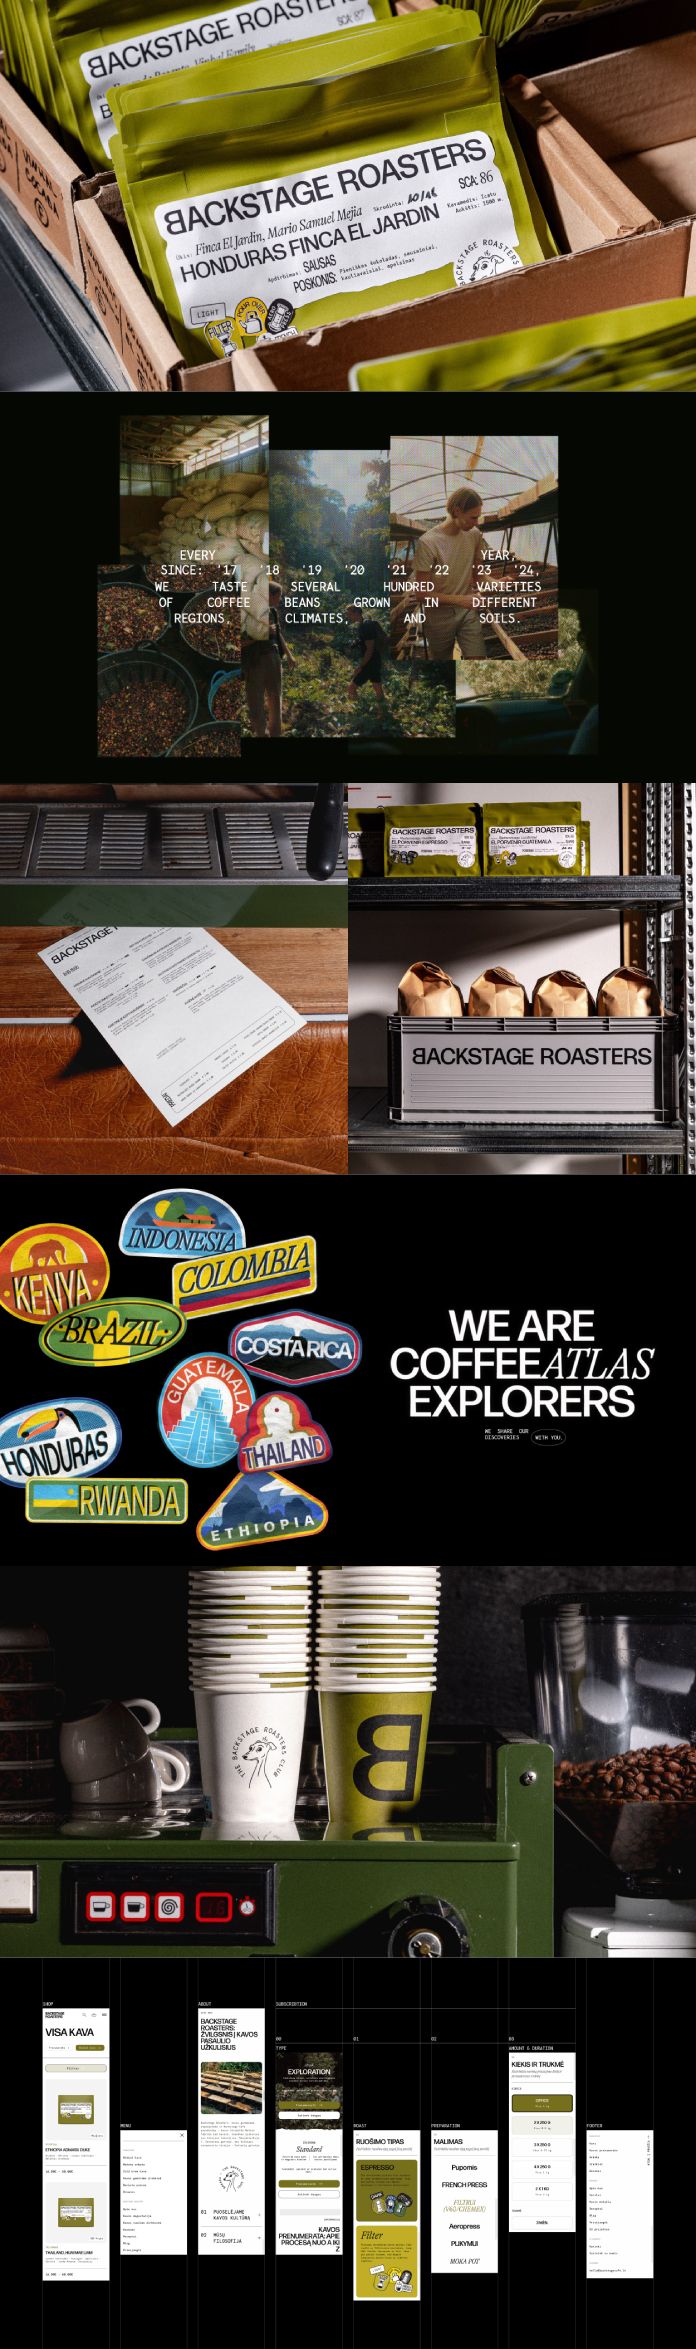 Brand and Packaging Design by Andstudio Agency for Backstage Roasters